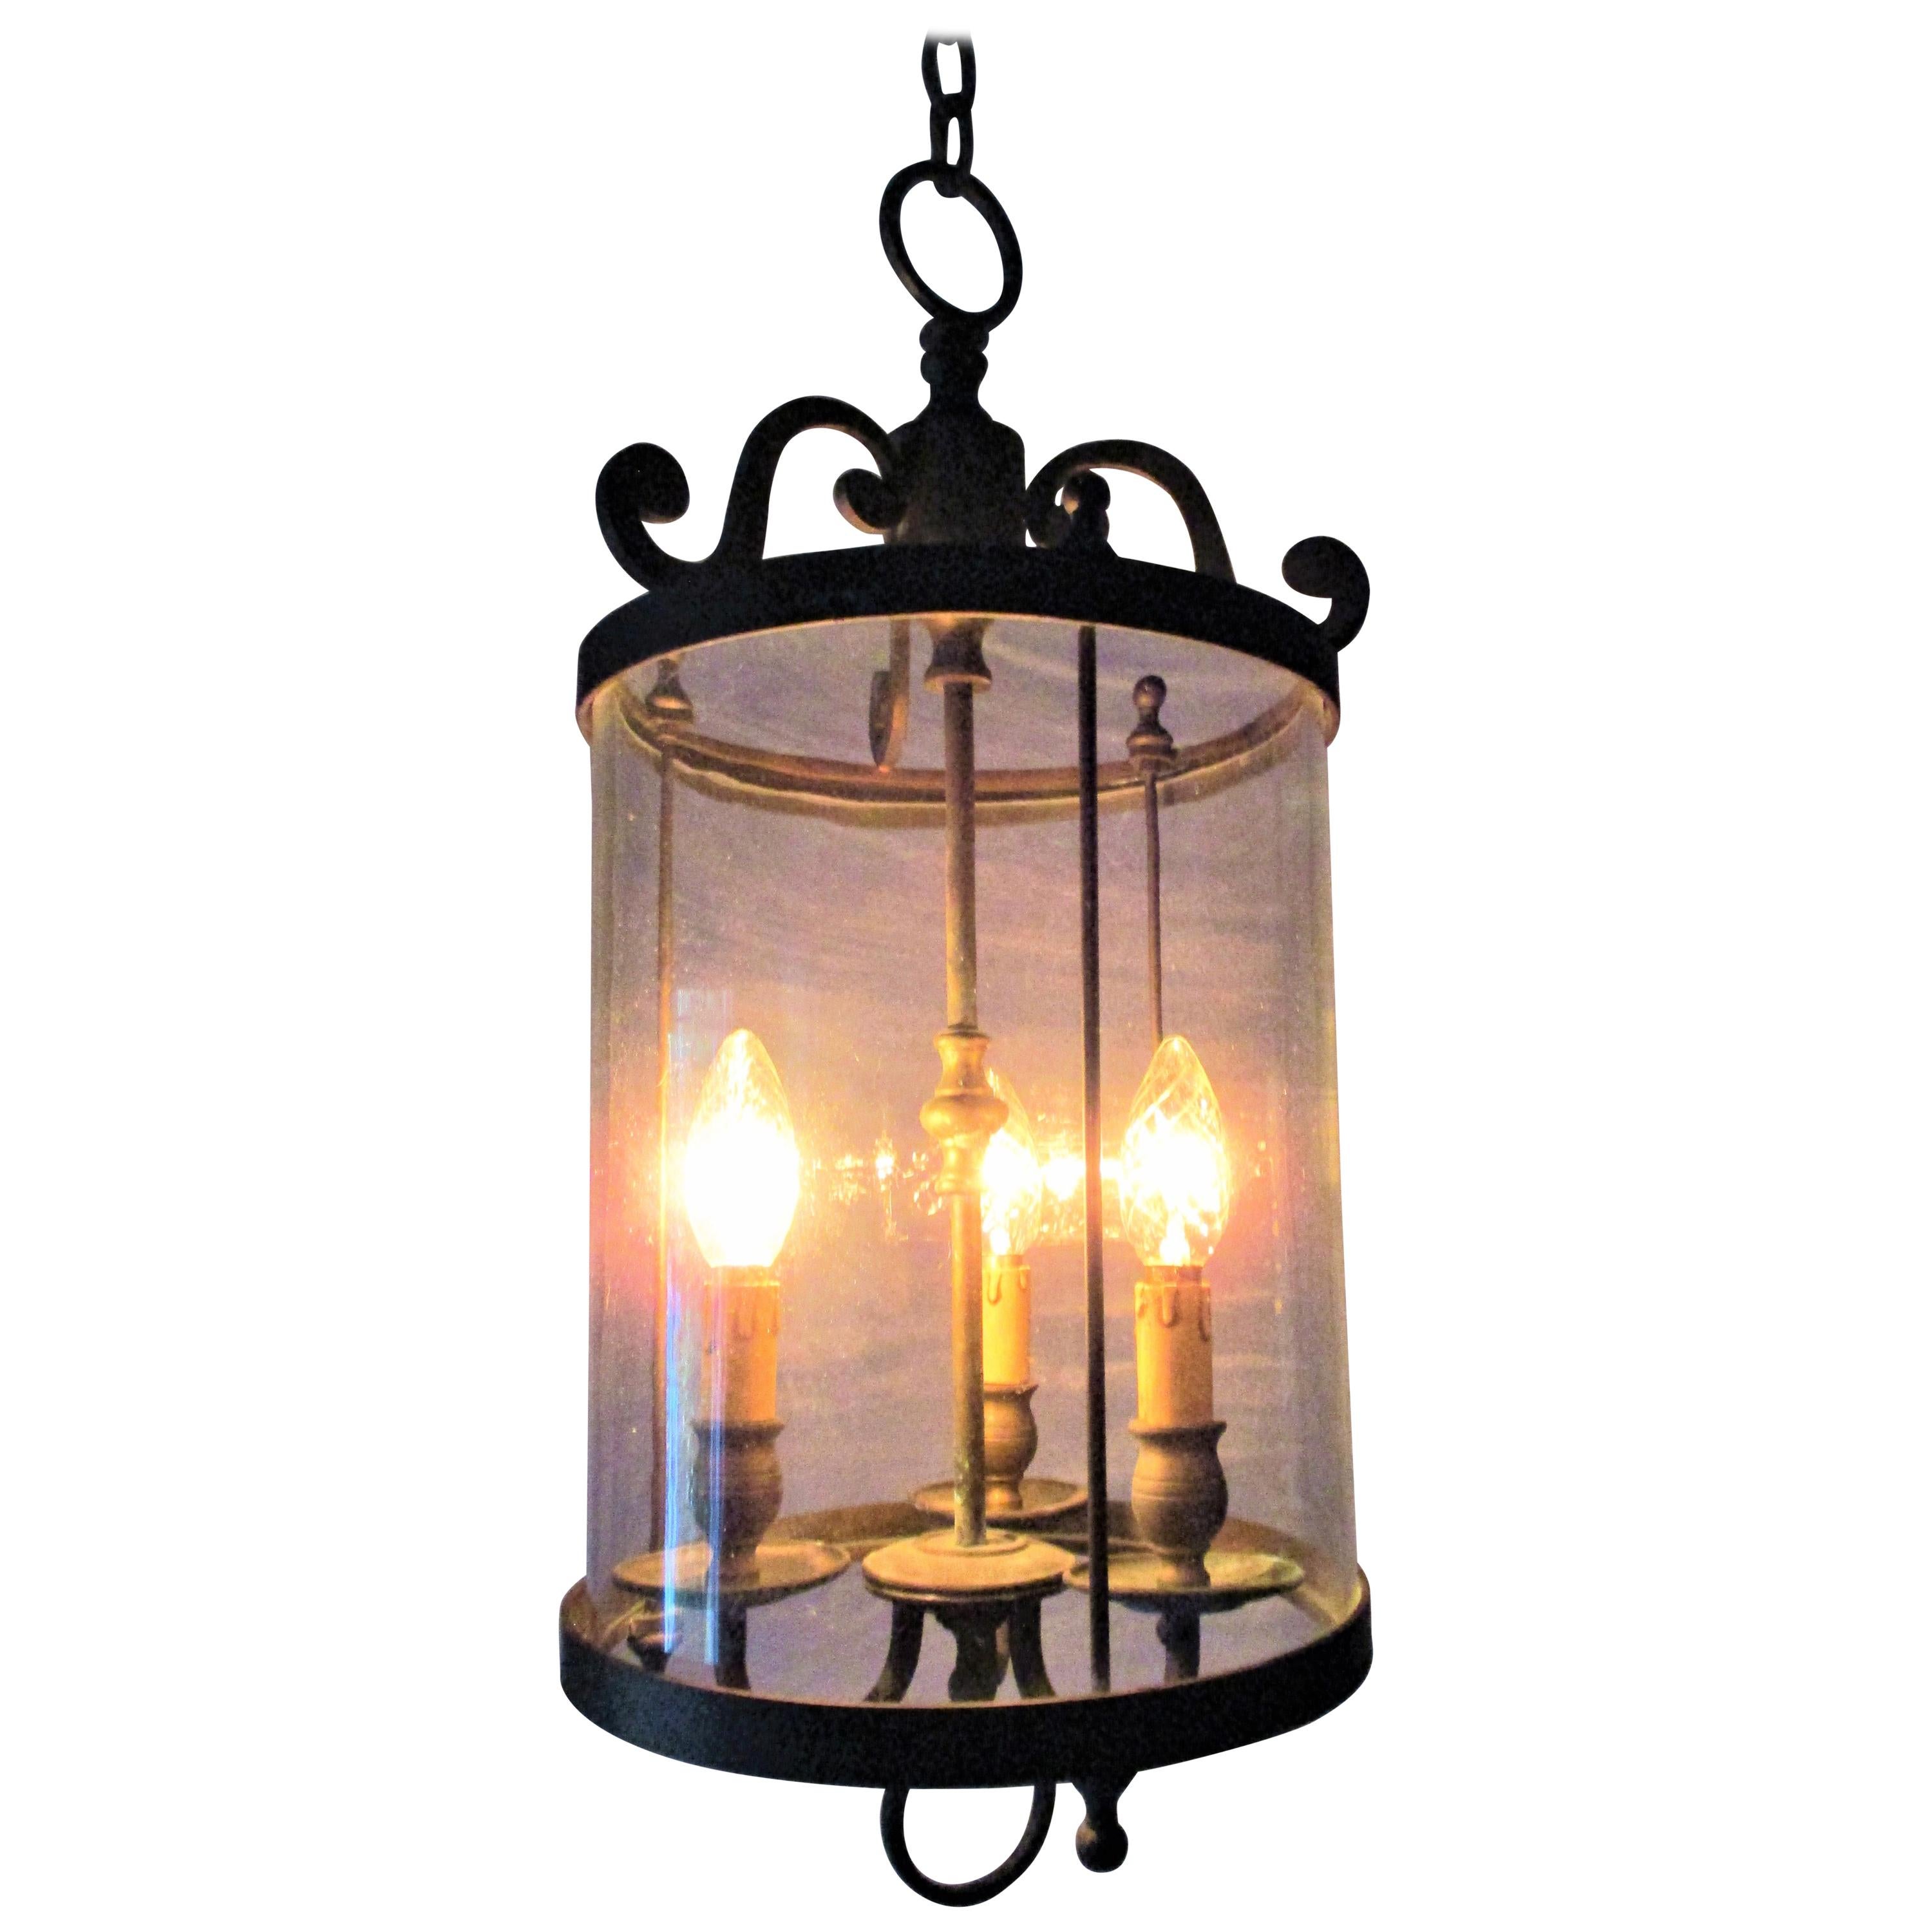 Gorgeous large Italian brass cylindrical lantern with original bubble glass cylinder.